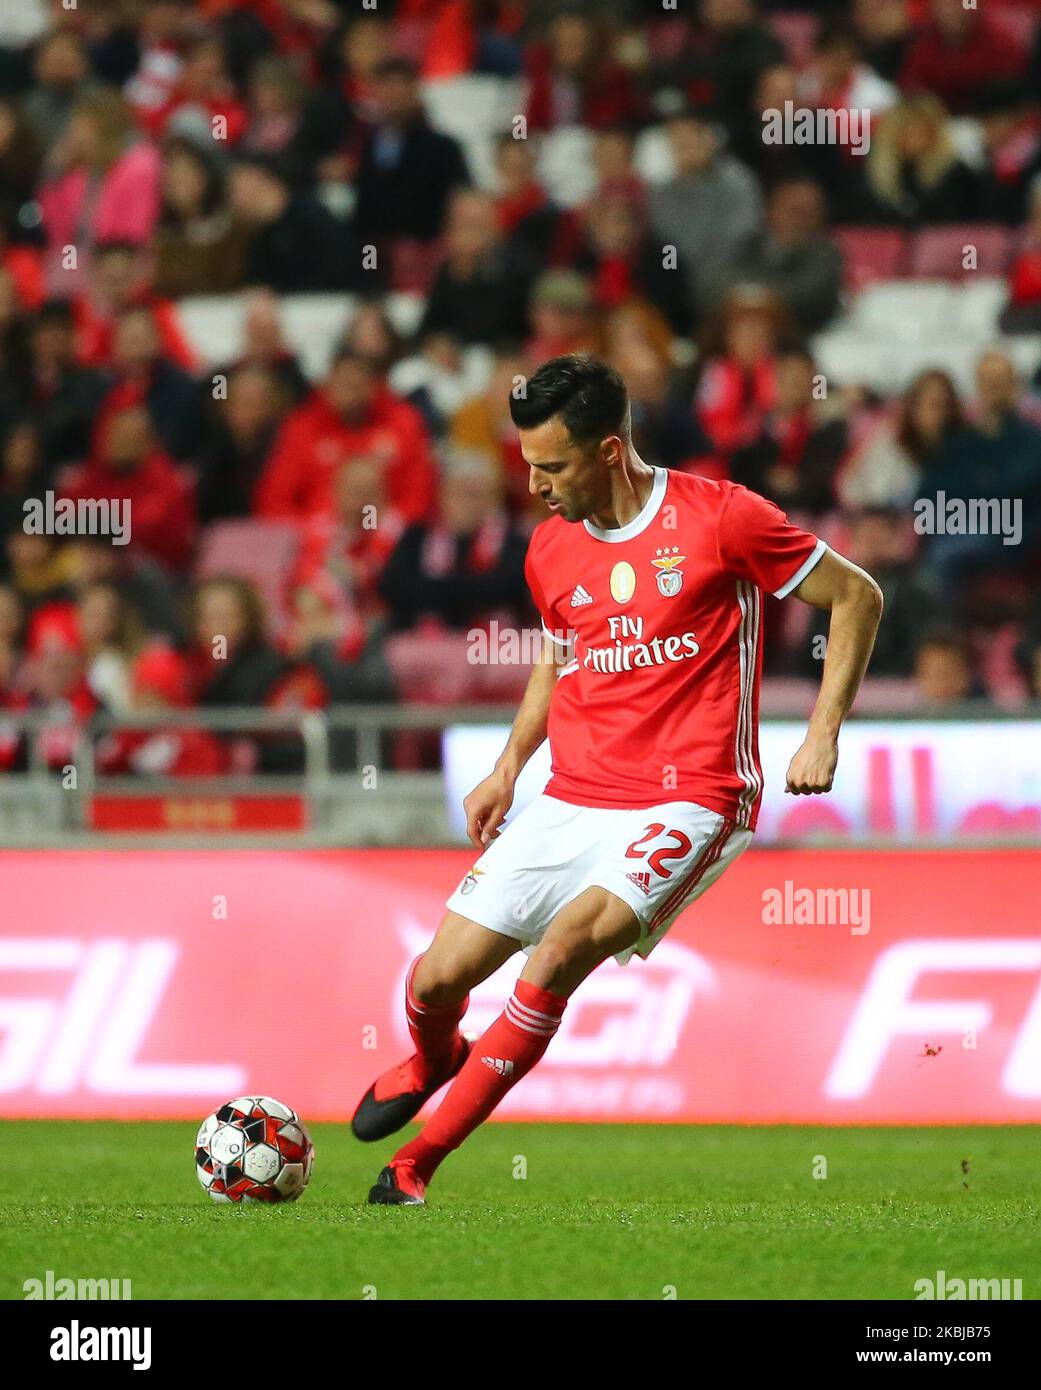 Andreas Samaris of SL Benfica in action during the Liga NOS match between SL Benfica and Moreirense FC at Estadio da Luz on March 2, 2020 in Lisbon, Portugal. (Photo by Paulo Nascimento/NurPhoto) Stock Photo